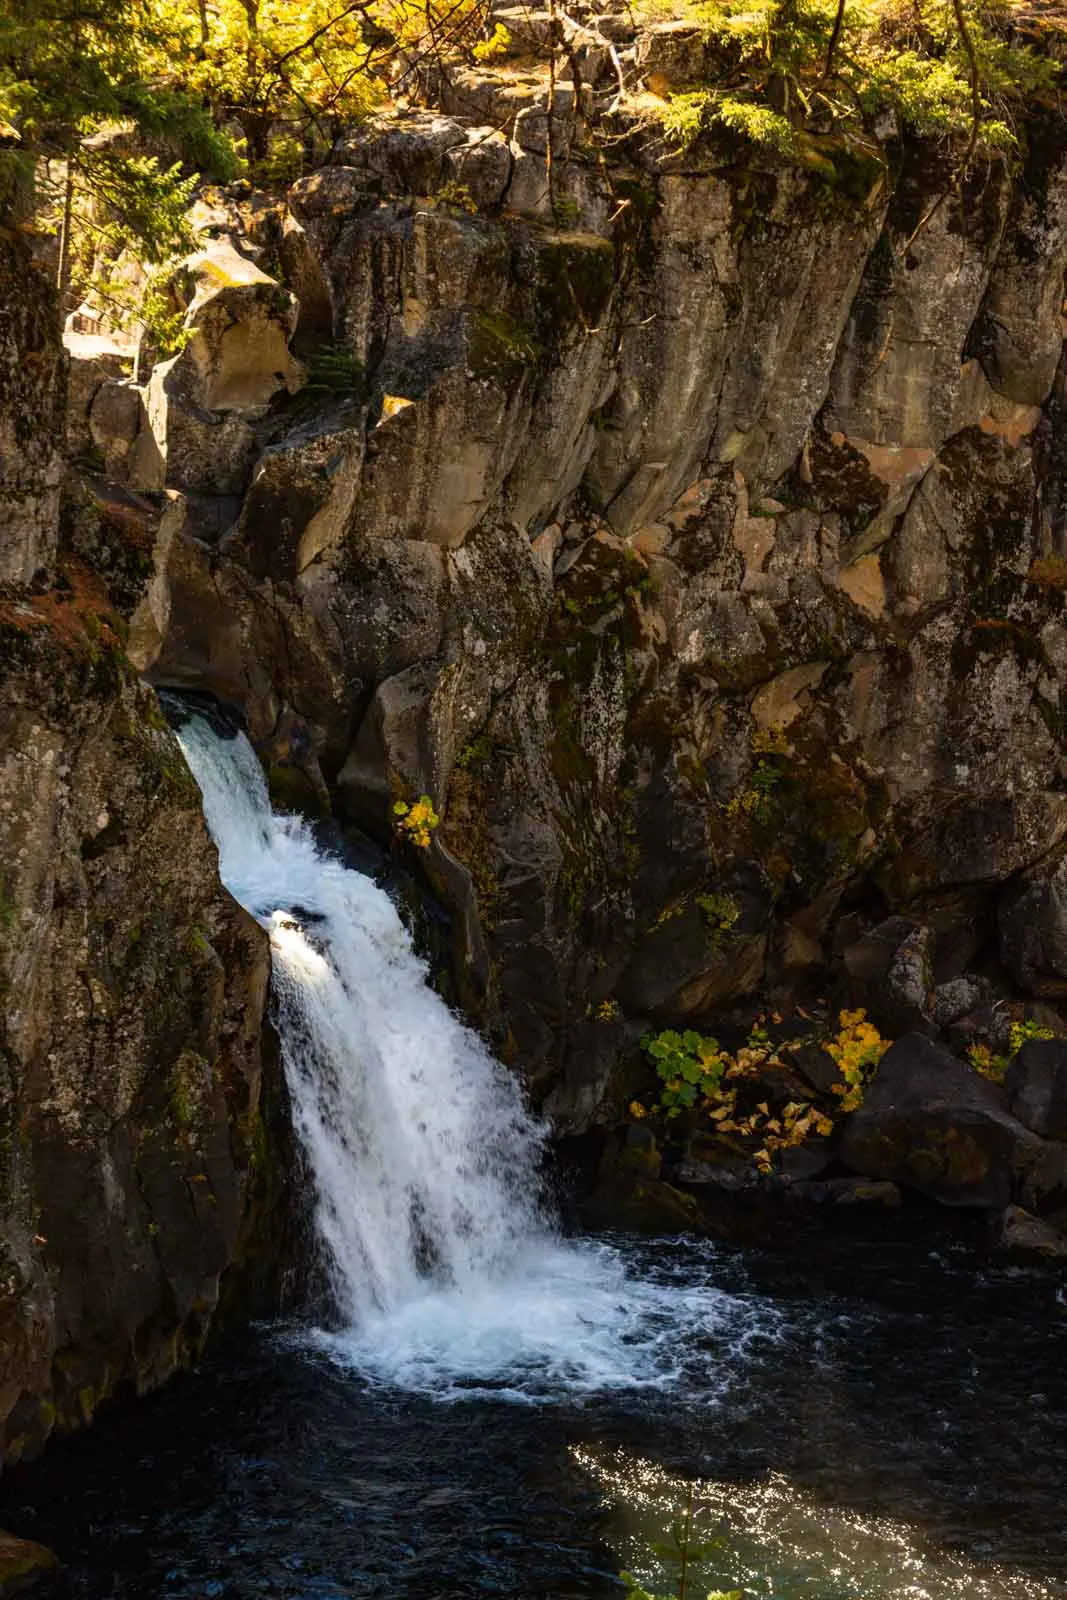 McCloud Falls is an adventurous thing to do in Northern California